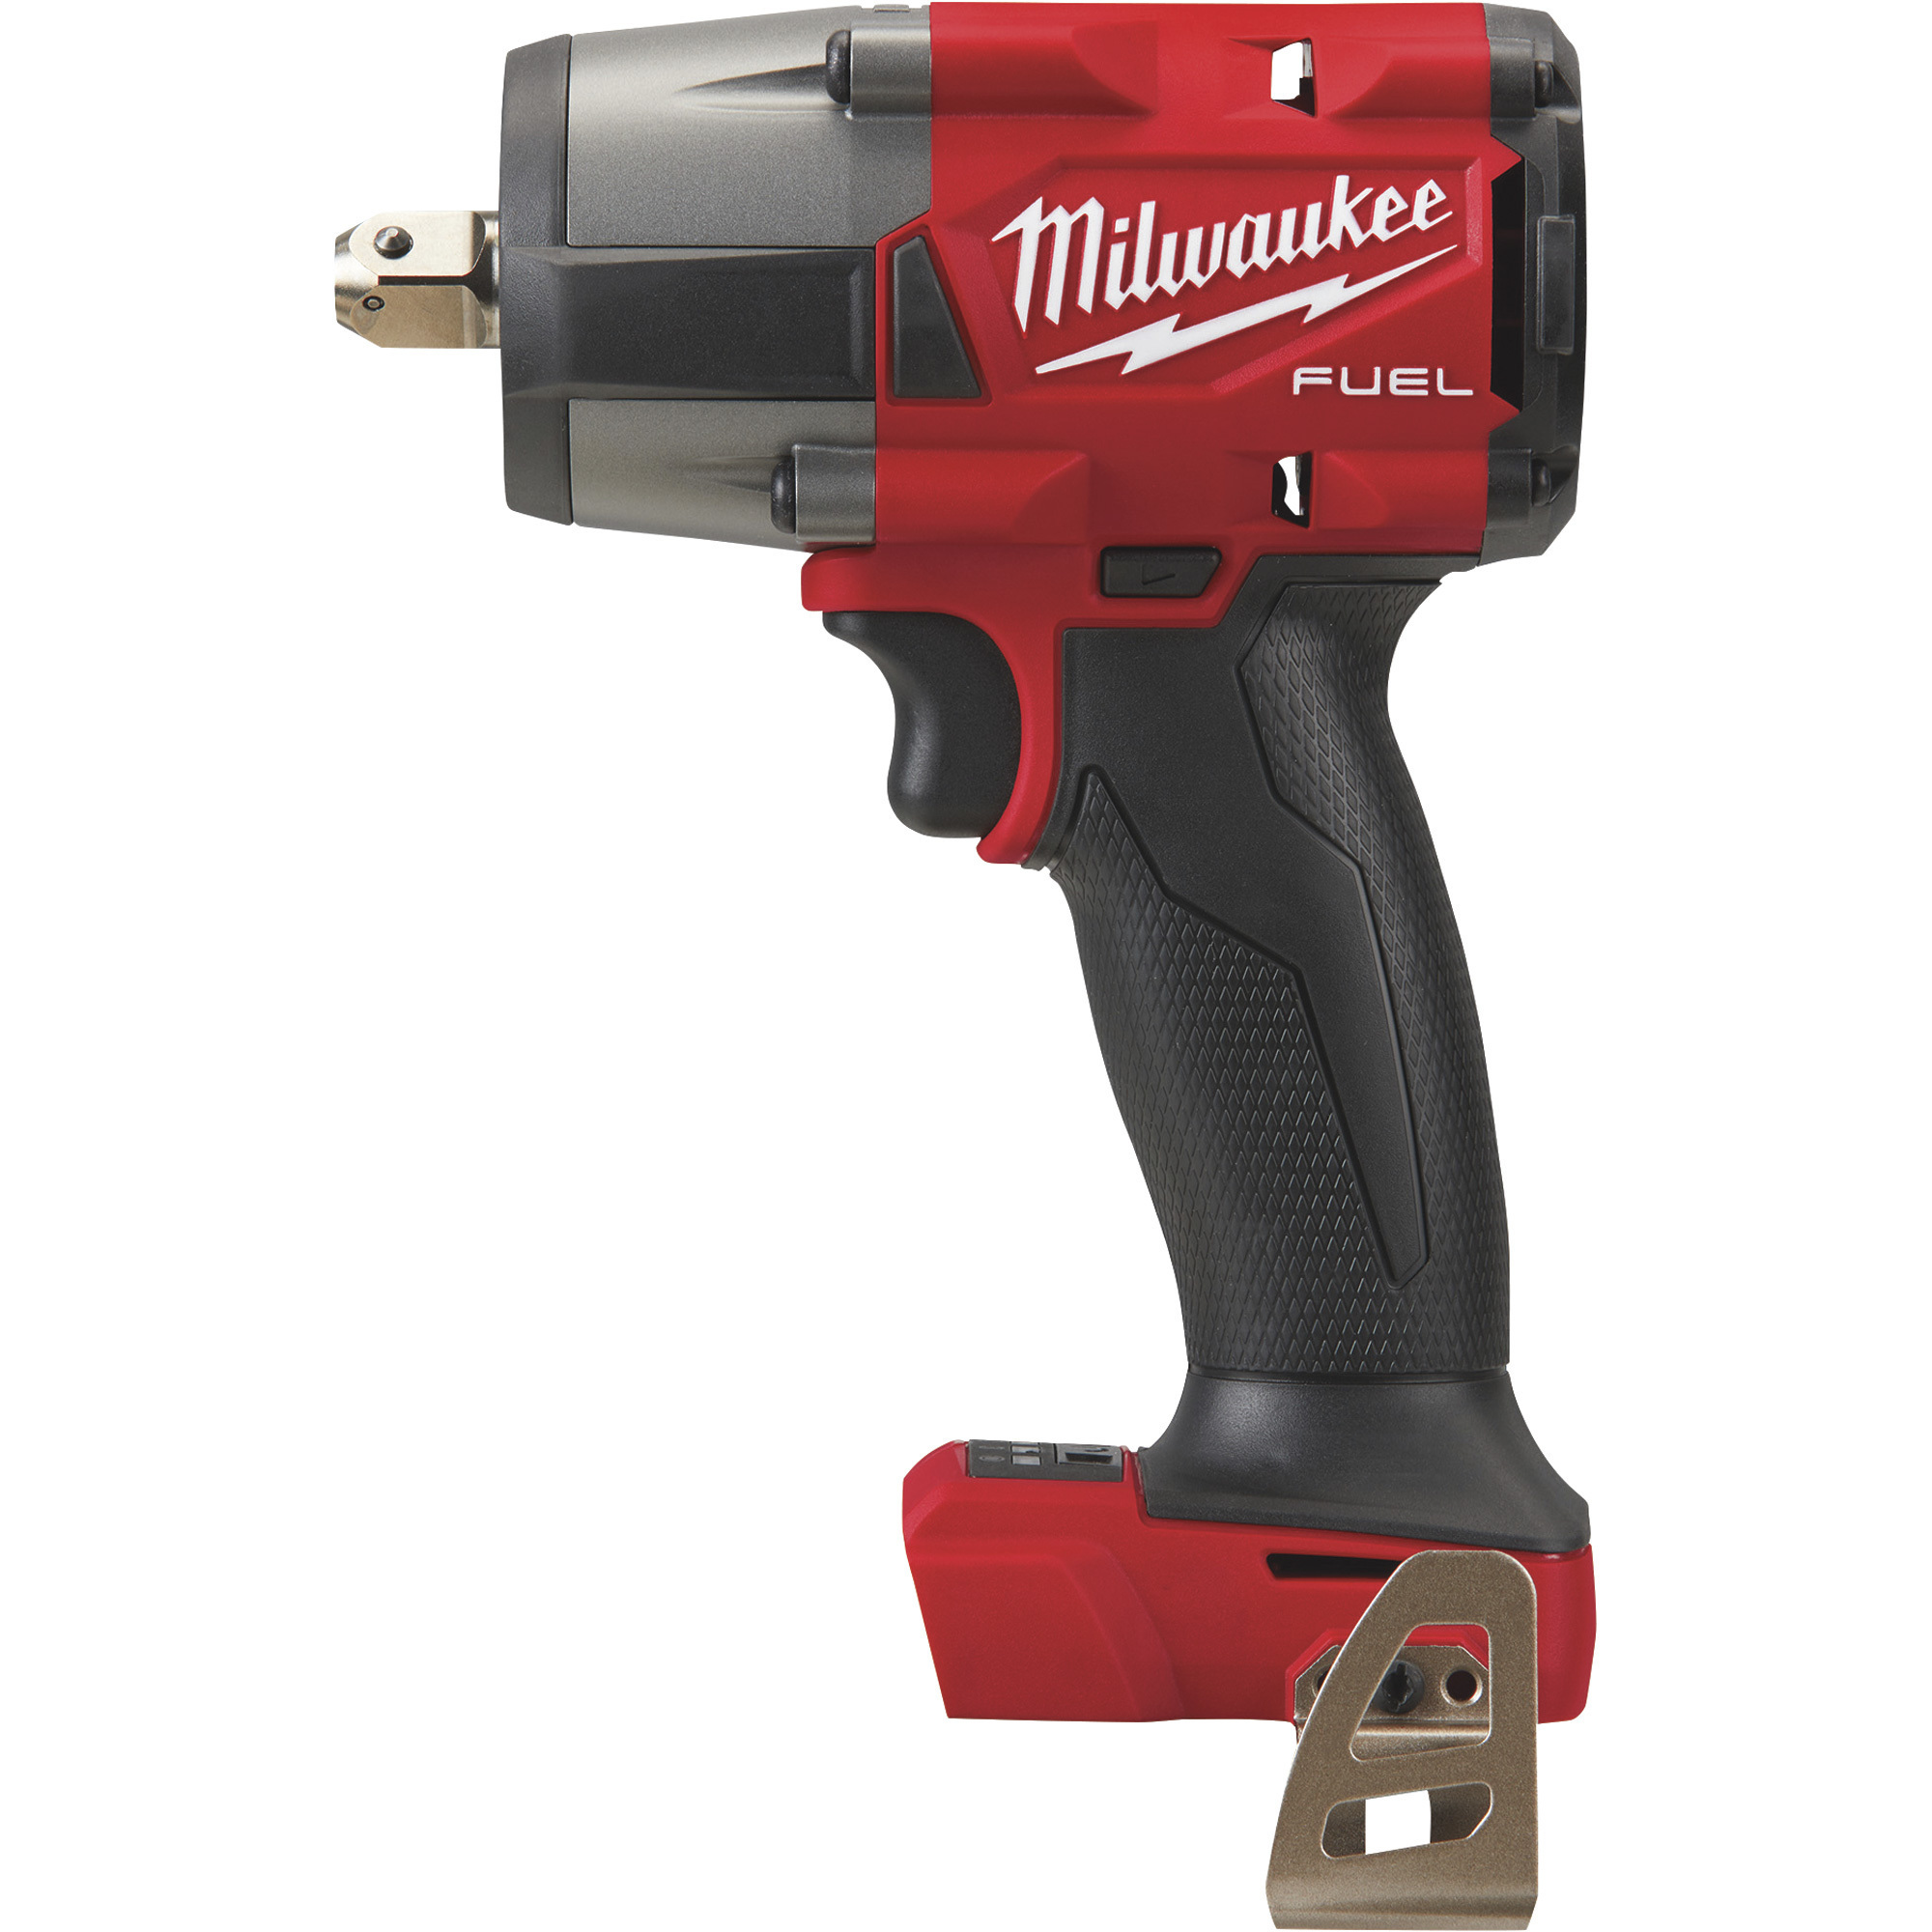 Milwaukee M18 FUEL Cordless Mid-Torque Impact Wrench with Pin Detent, Tool Only, 1/2Inch Drive, 650 Ft./Lbs. Torque, Model 2962P-20